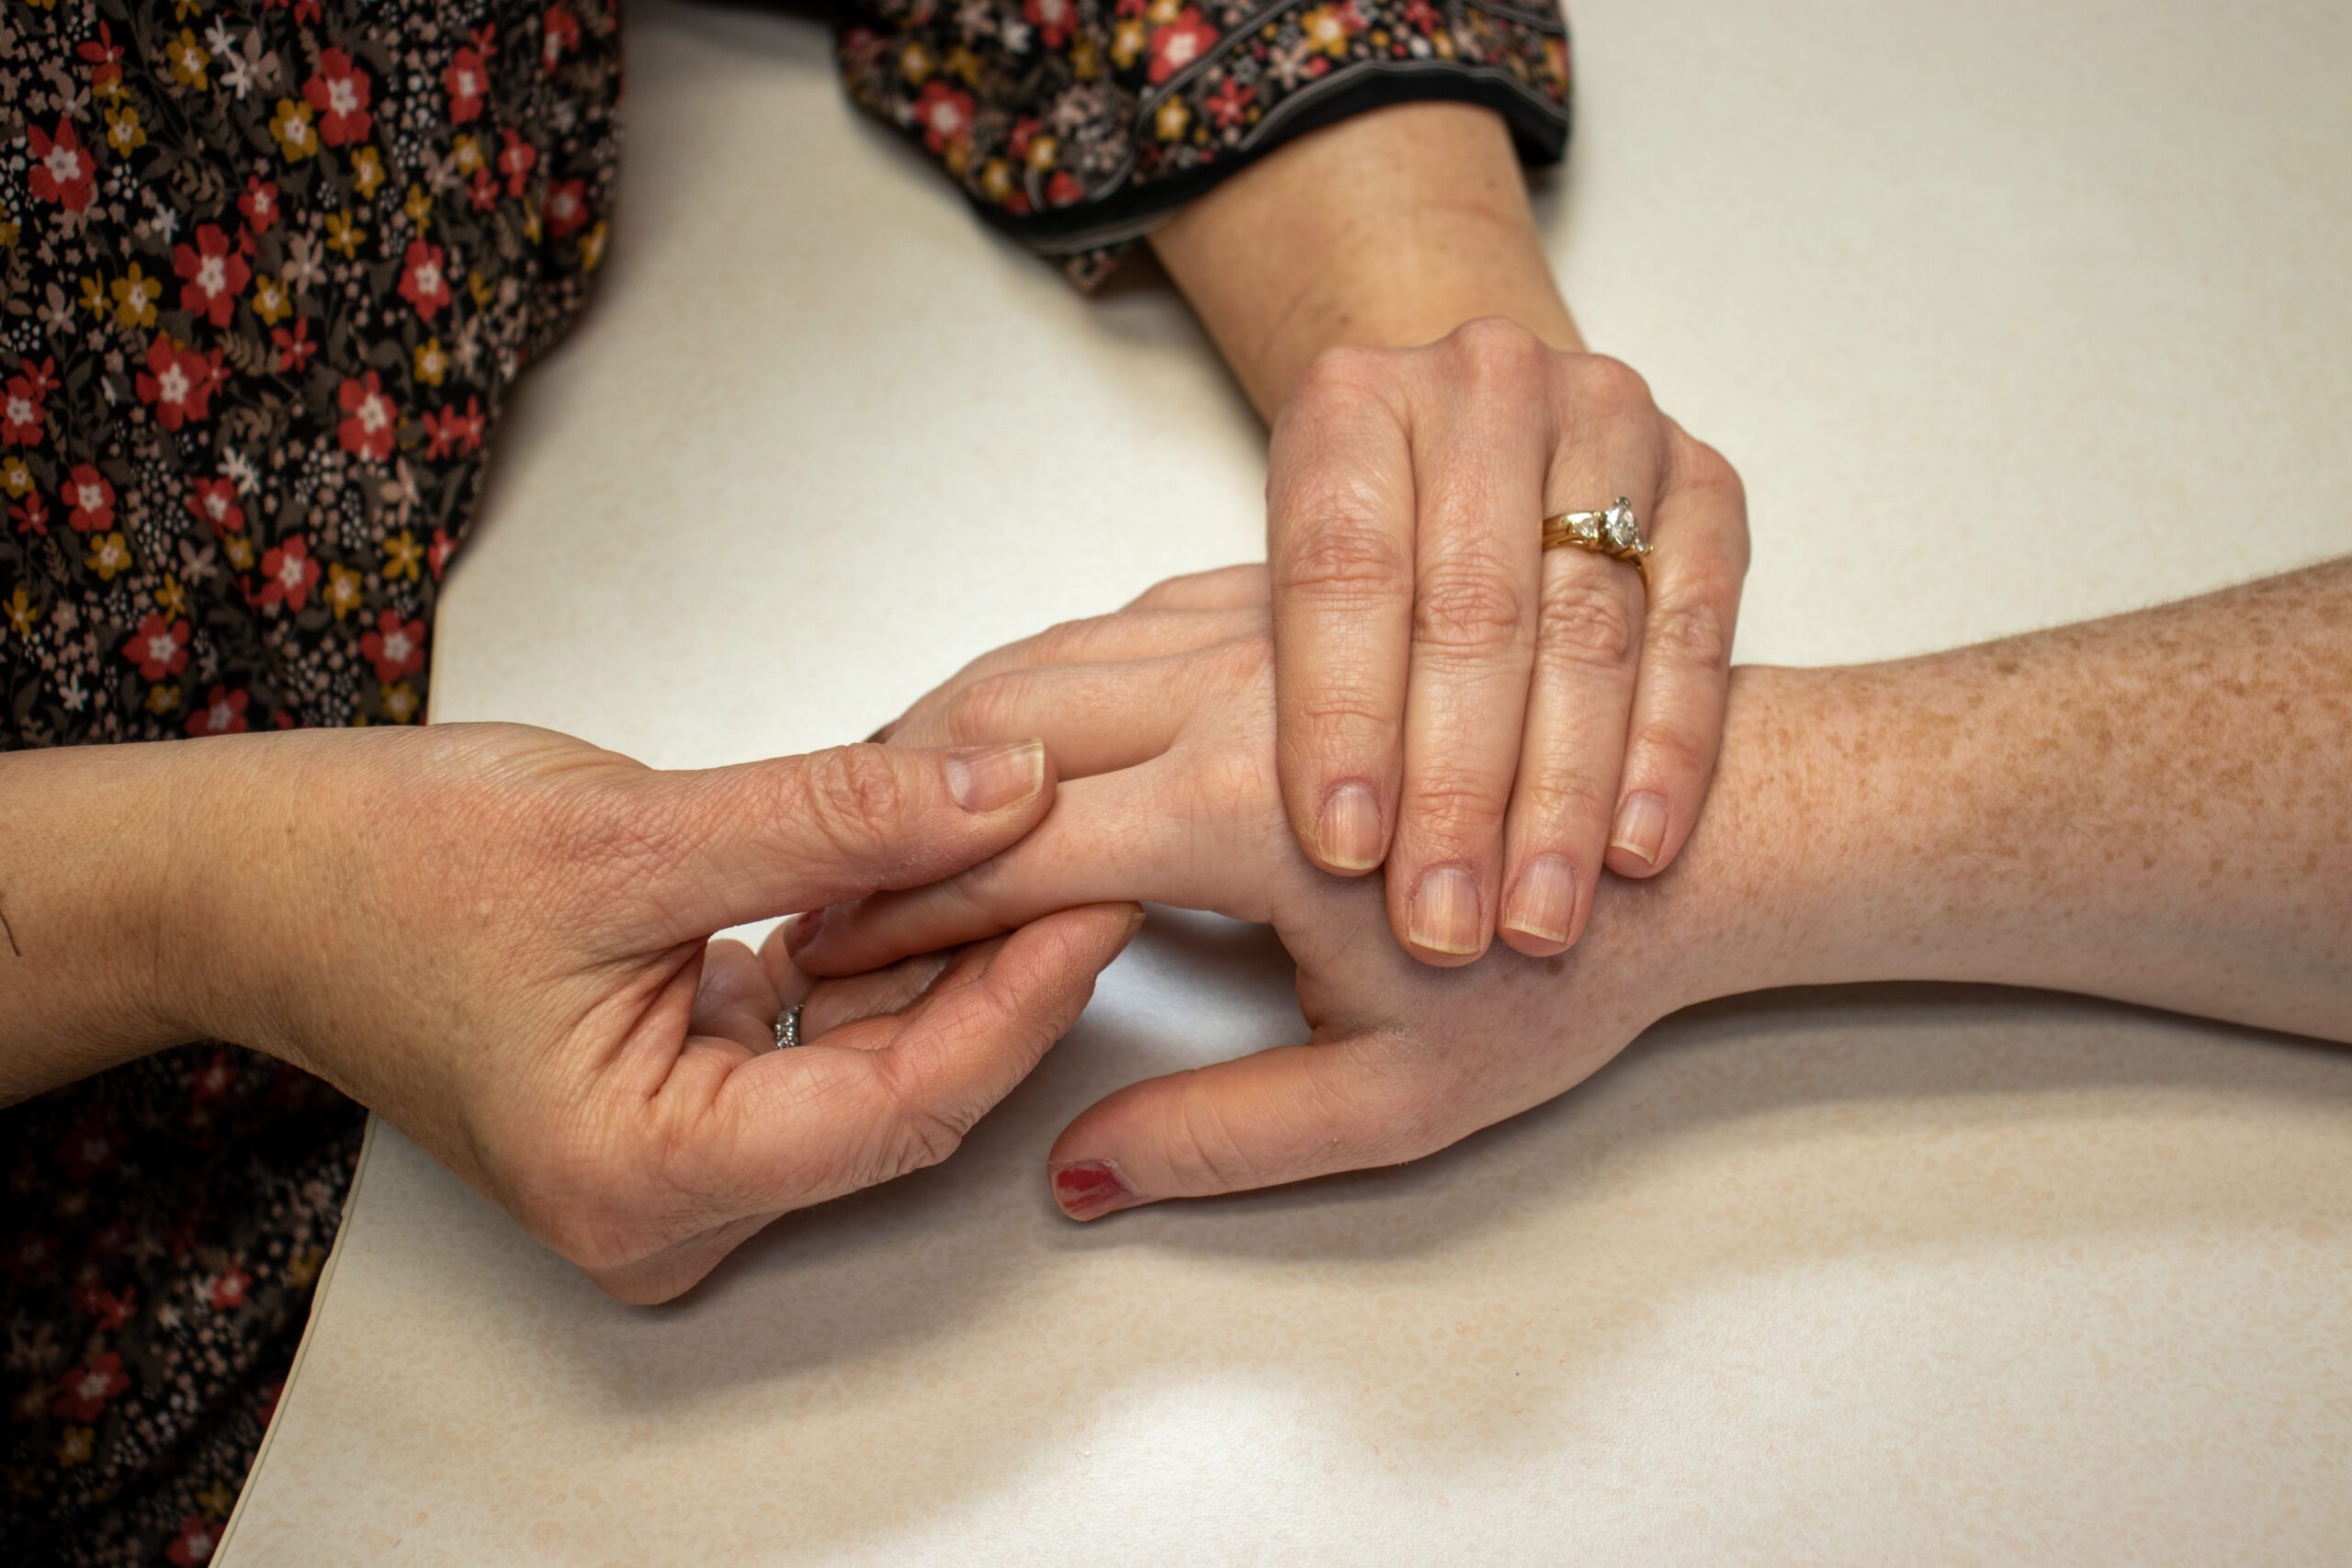 A picture of a hand therapist performing joint mobilization for hand rehabilitation at STAR Physical Therapy.